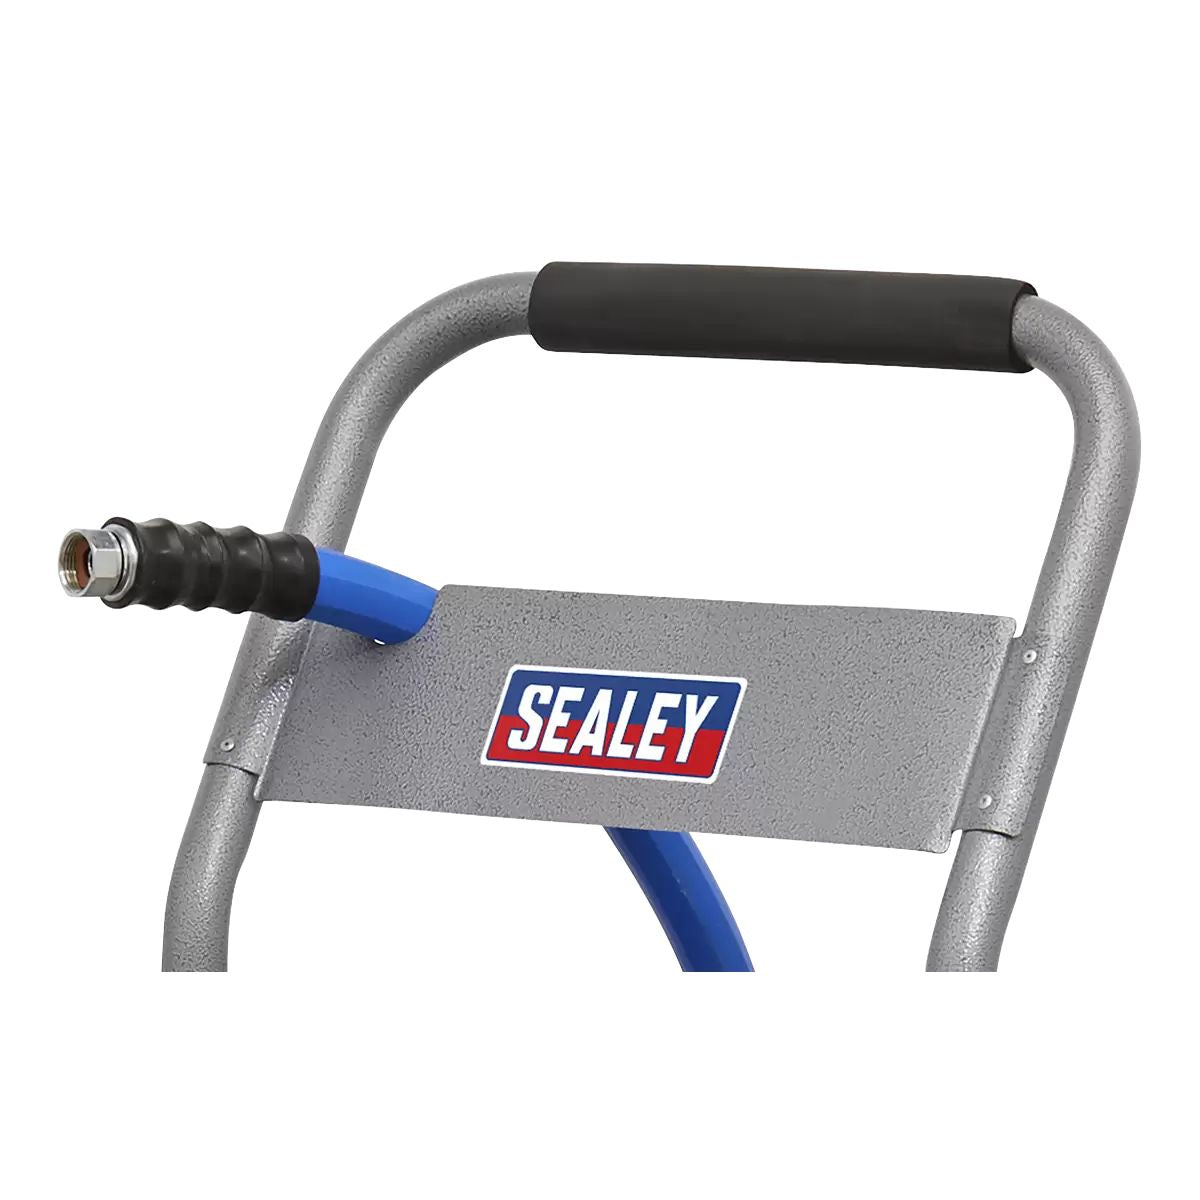 Sealey HRKIT30Heavy-Duty Hose Reel Cart with 30m Hot & Cold Rubber Water Hose